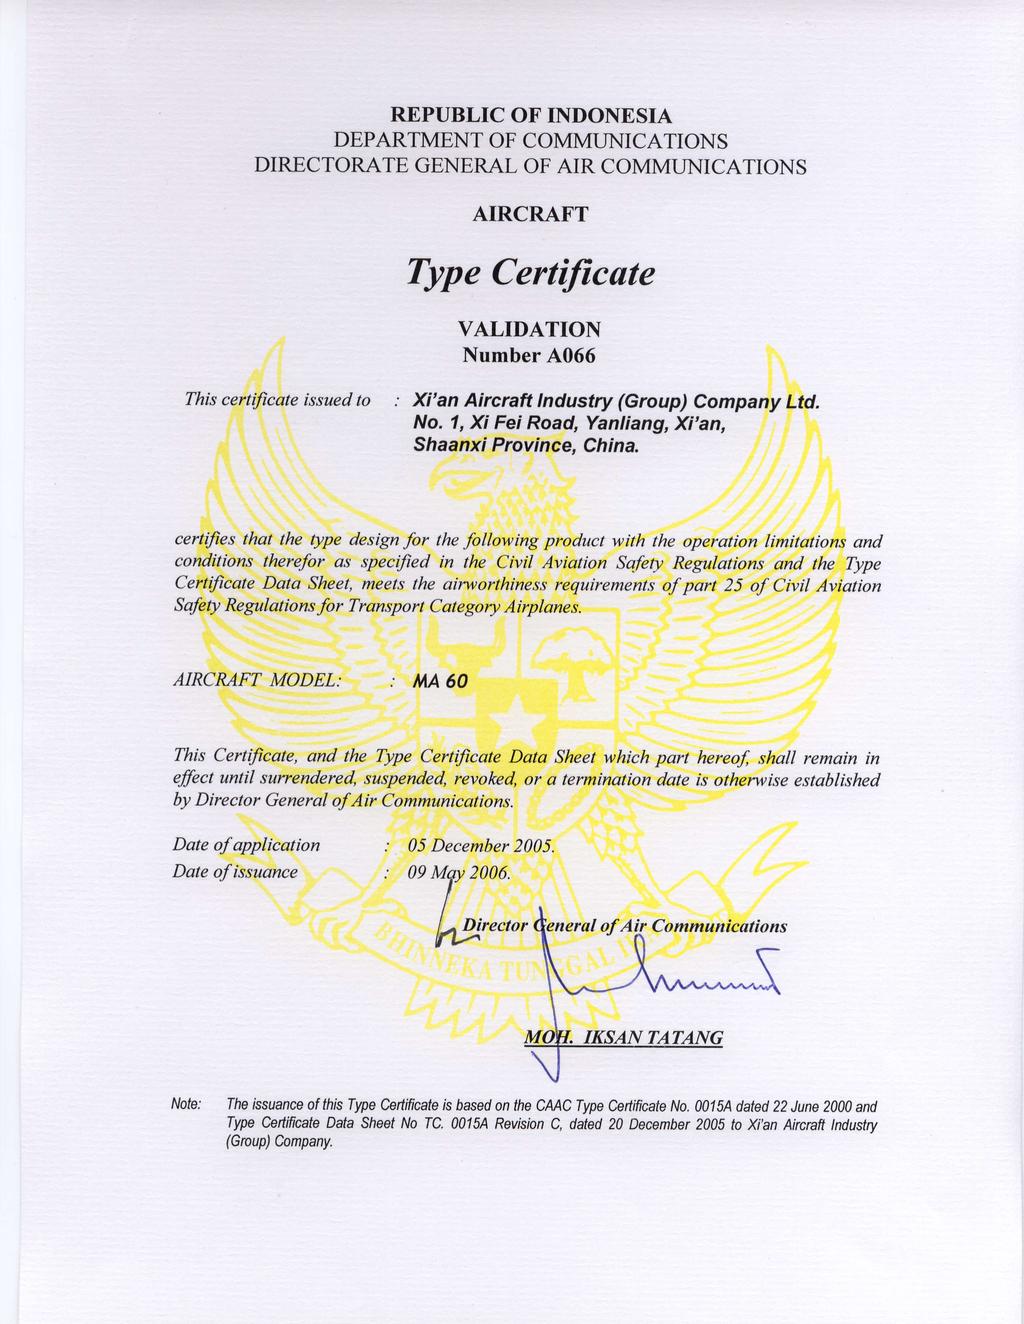 REPUBLIC OF INDONESIA DEPARTMENT OF COMMLTNICATIONS DIRECTORATE GENERAL OF AIR COMMT]NICATIONS AIRCRAFT Type Certi/icute VALIDATION Number This certi/icate issued to : Xi'an Aircraft lndustry (Group)